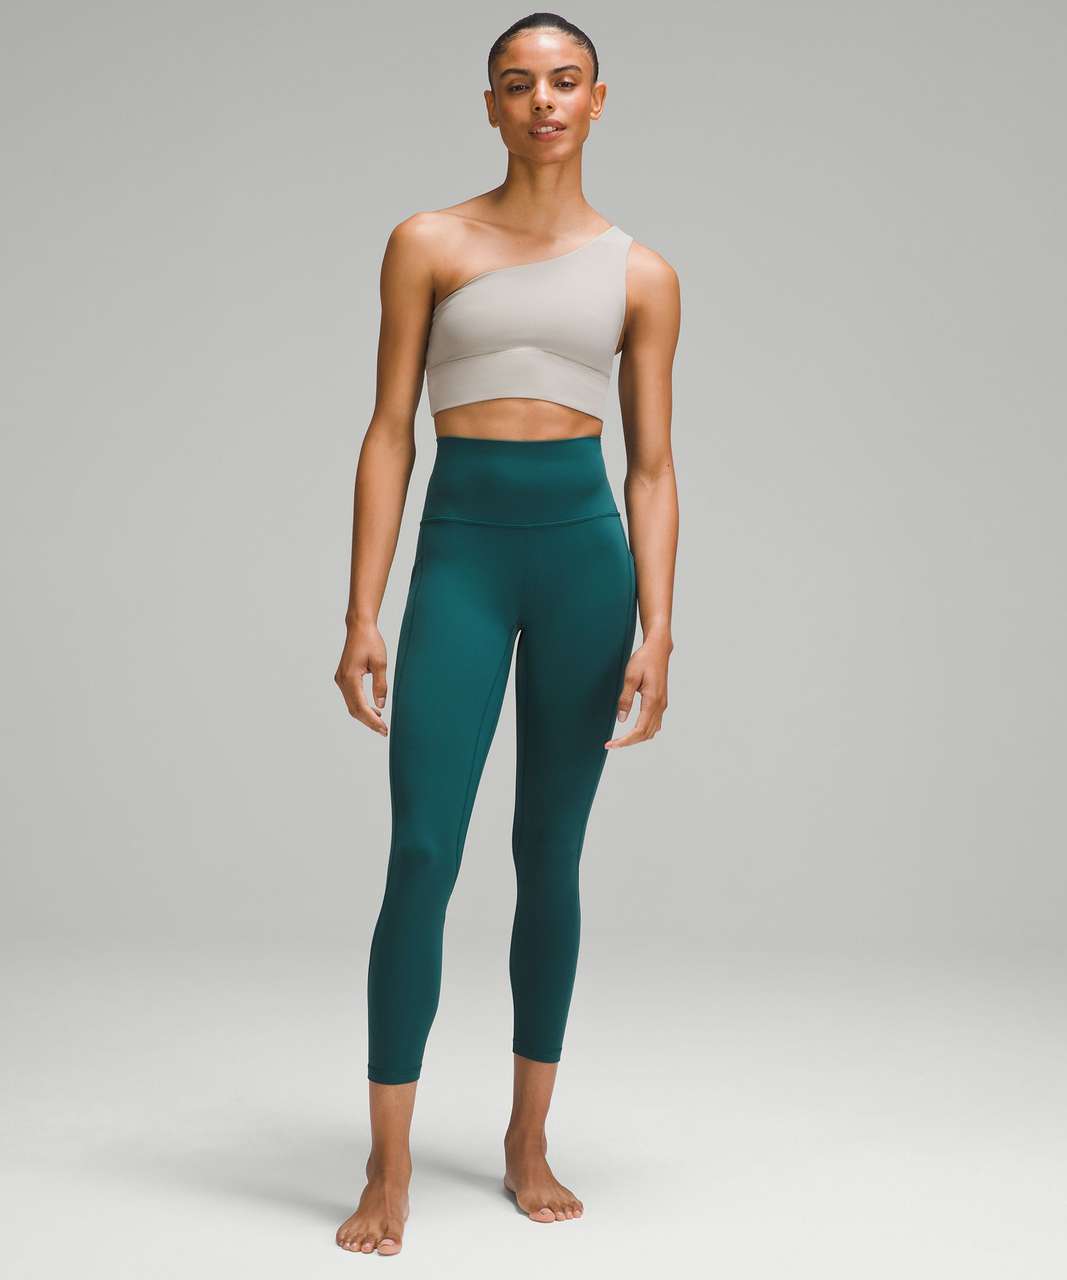 Lululemon Align High-Rise Pant with Pockets 25" - Storm Teal